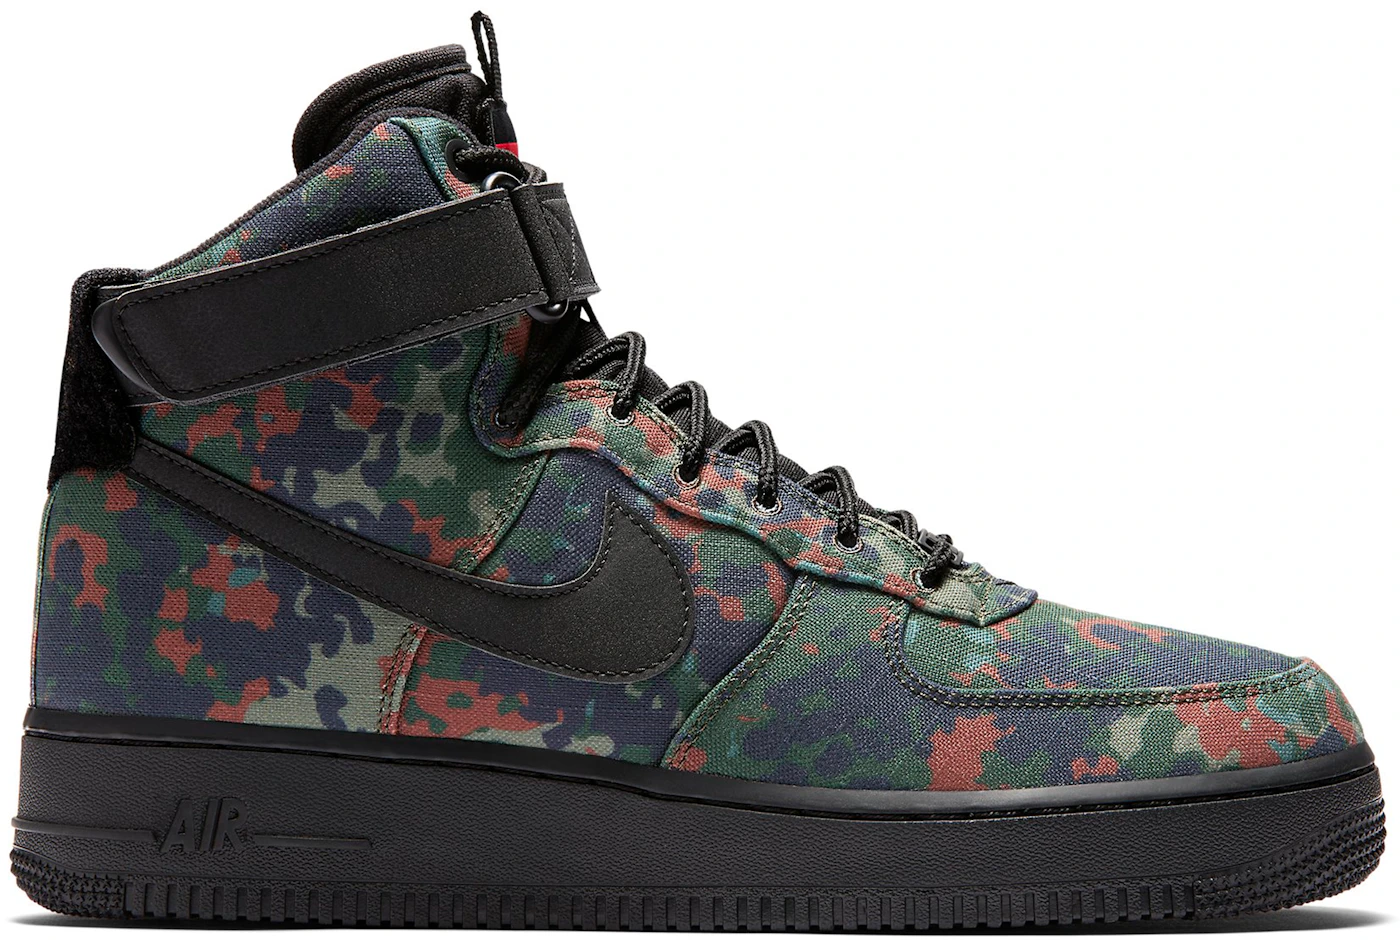 Nike Air Force 1 '07 LV8 Country Camo